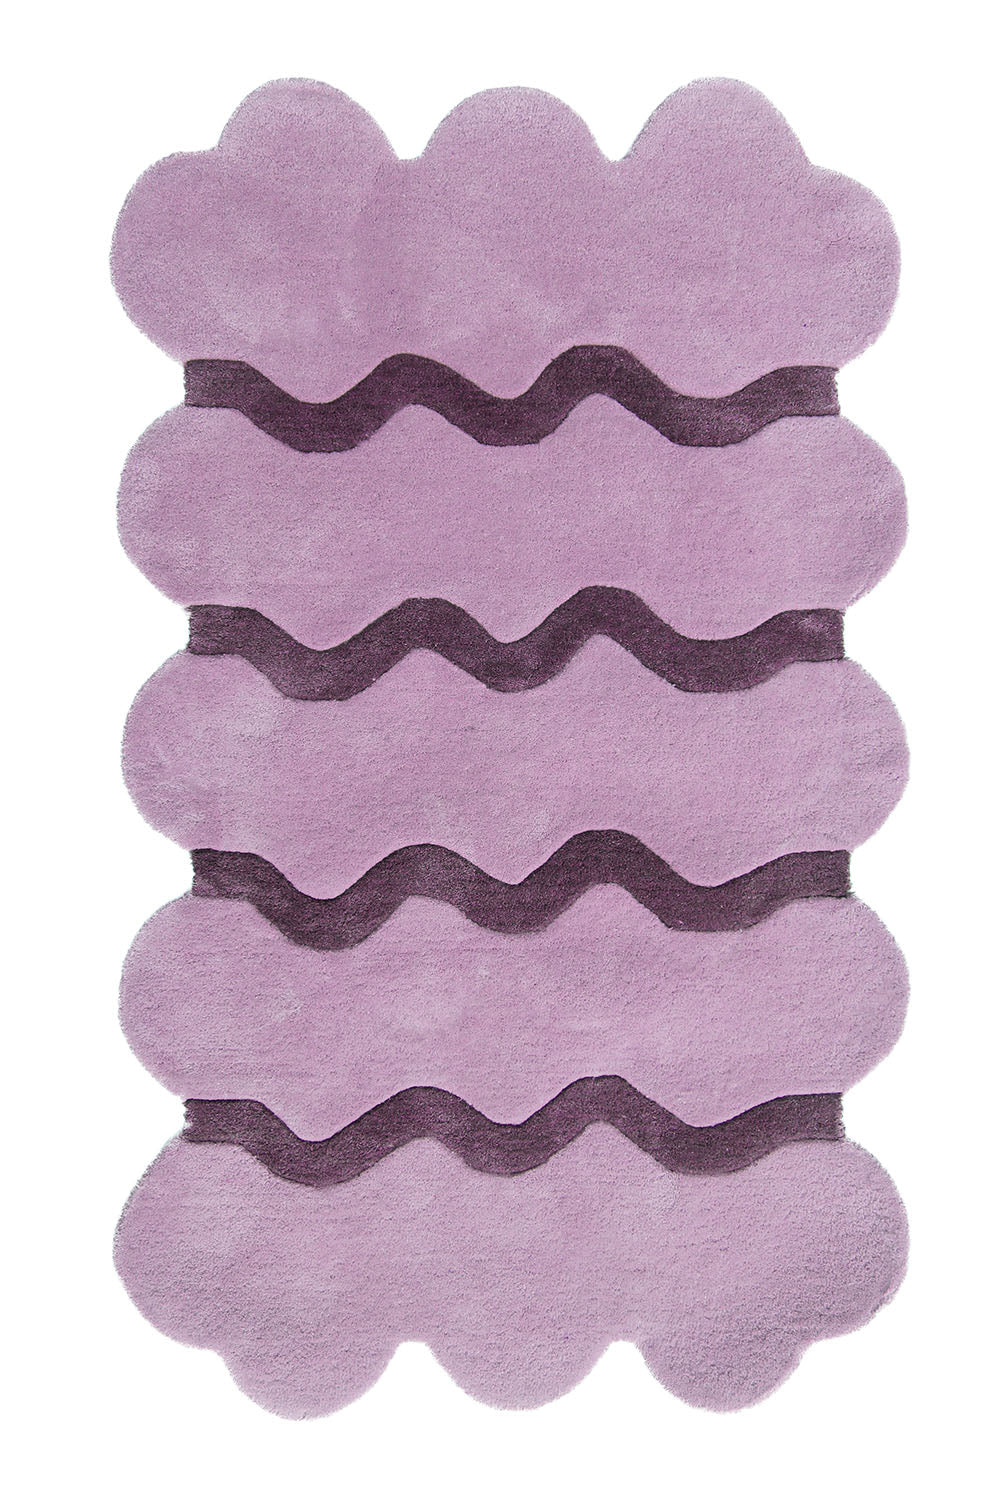 Sculpted Edge Hand Tufted Wool Rug in Purple by Jubi